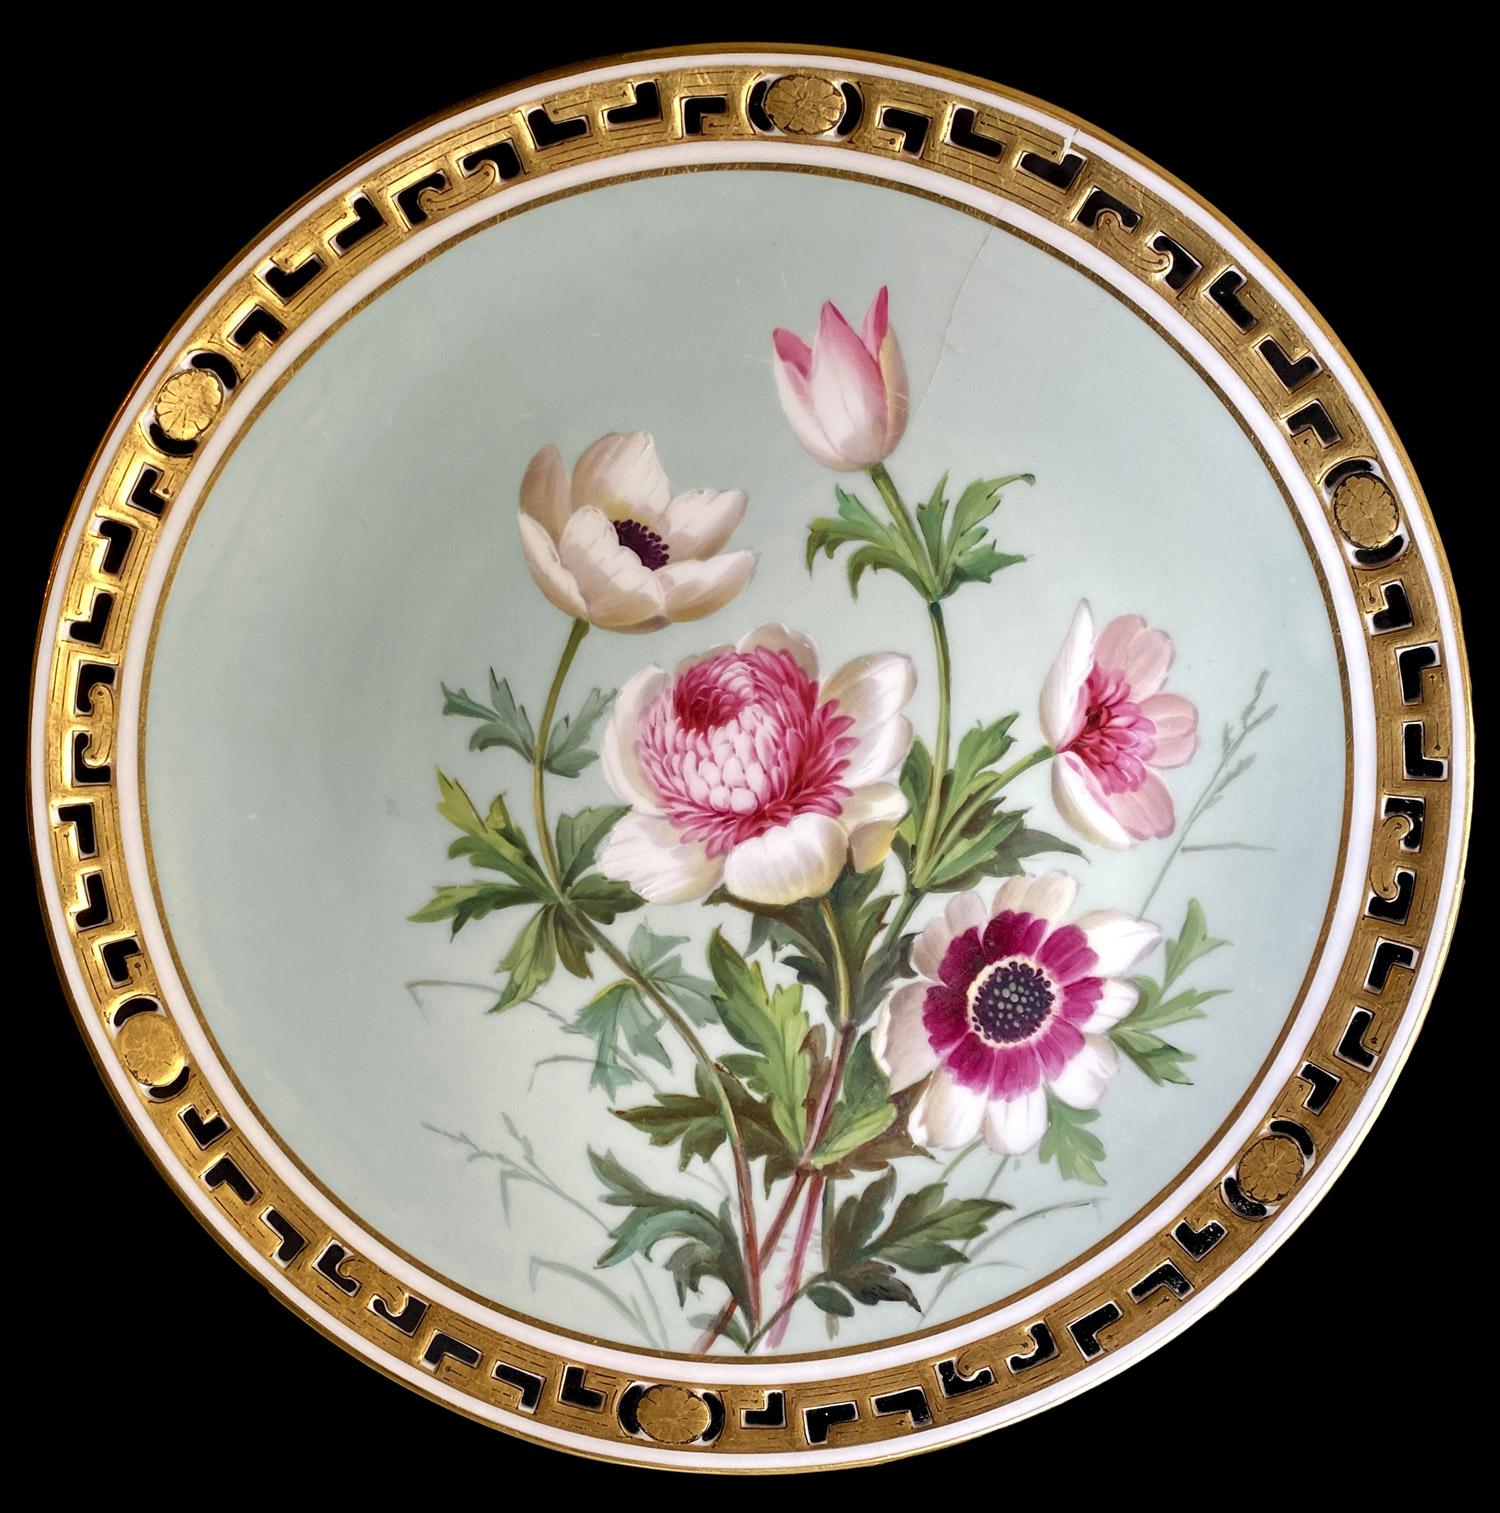 English 11 Dinner Plates Flowers and Gold, Minton Porcelain, 1874-1884